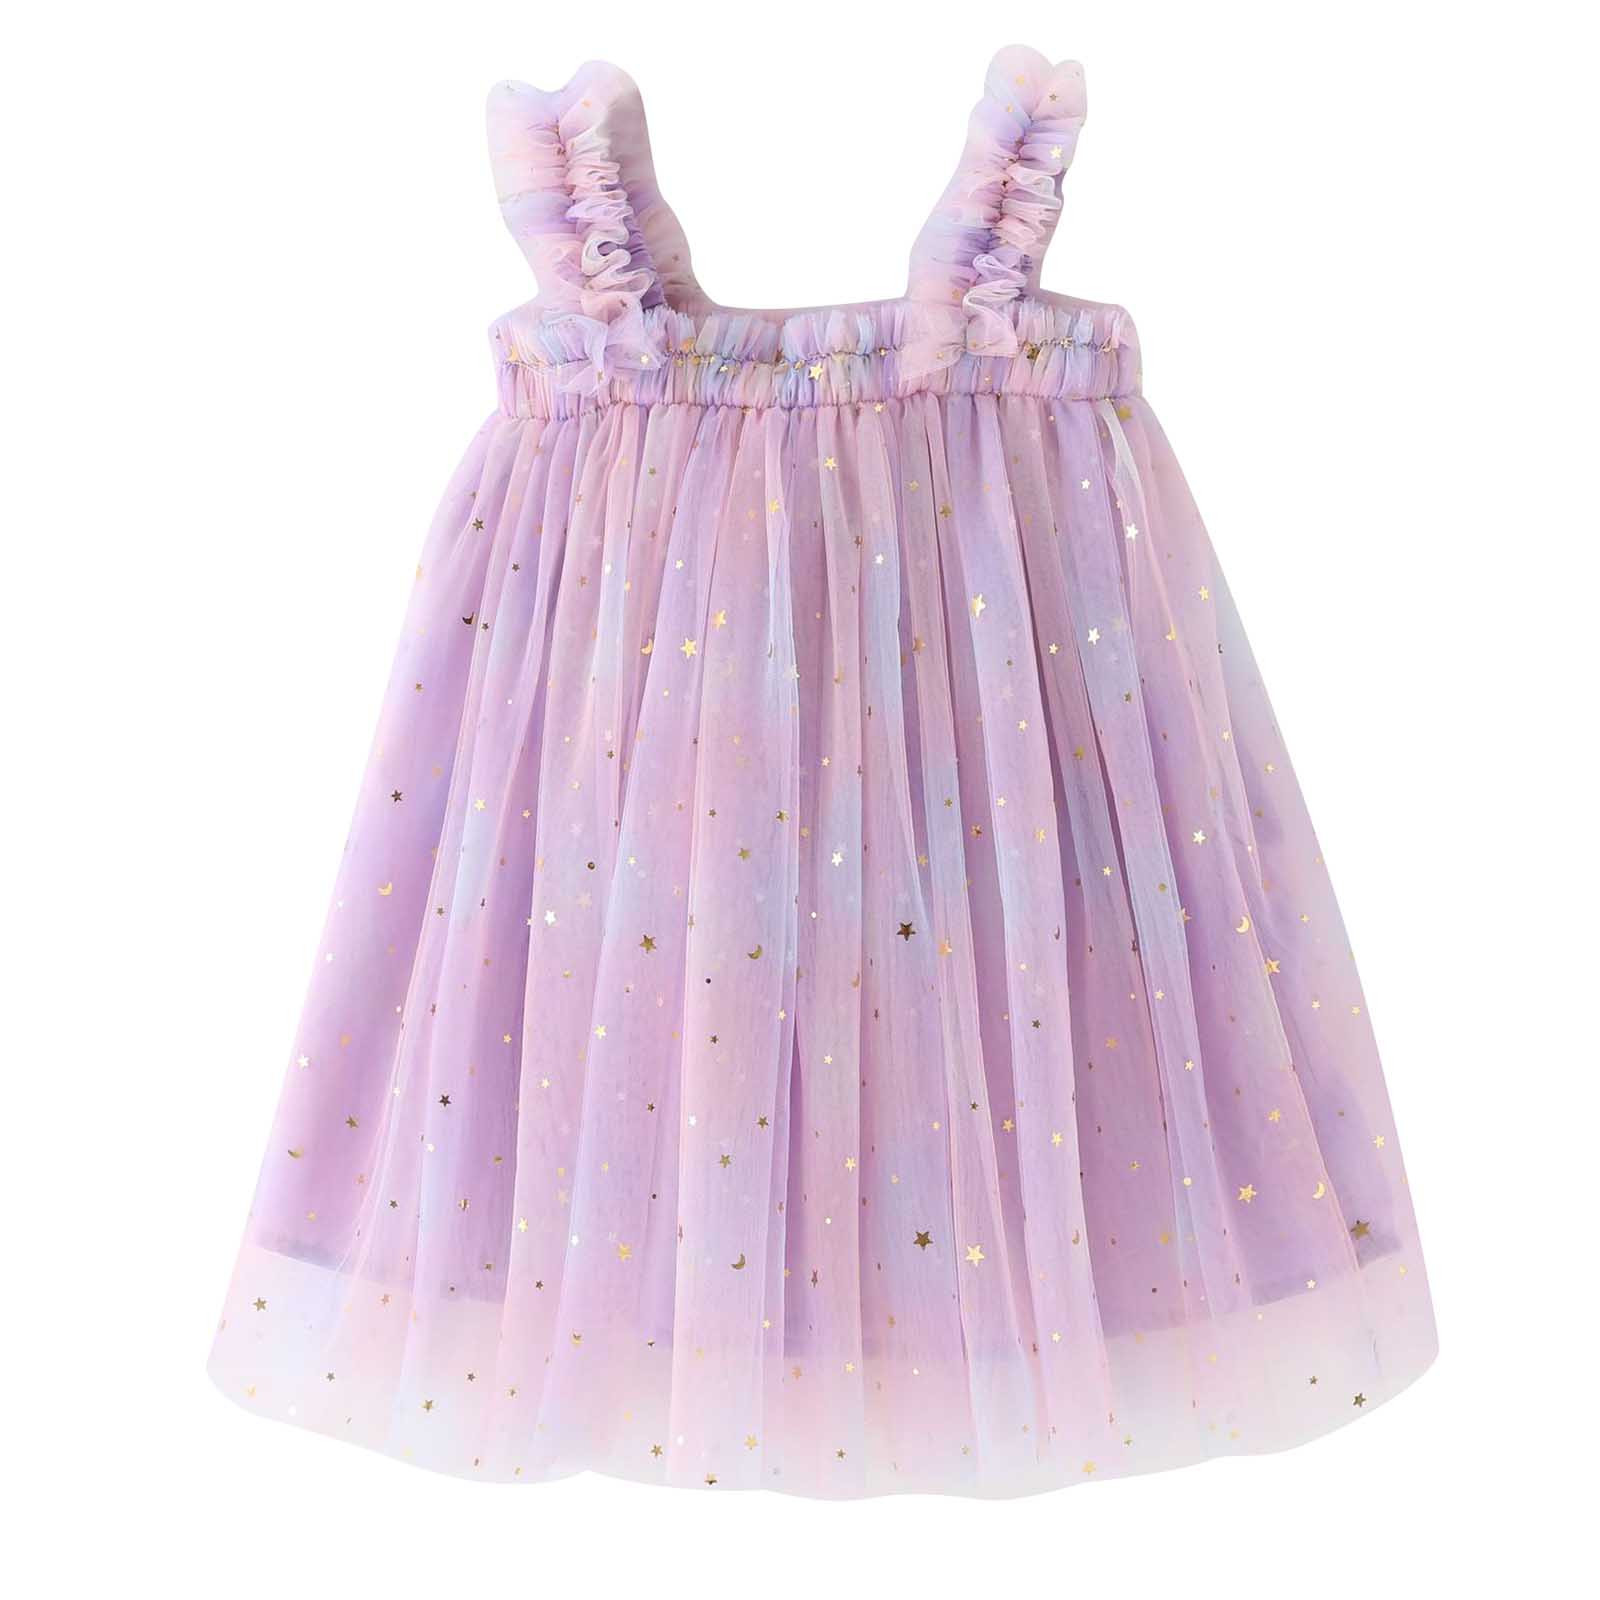 ZCFZJW Toddler Baby Girls Tulle Dresses Summer Cute Solid Color ...